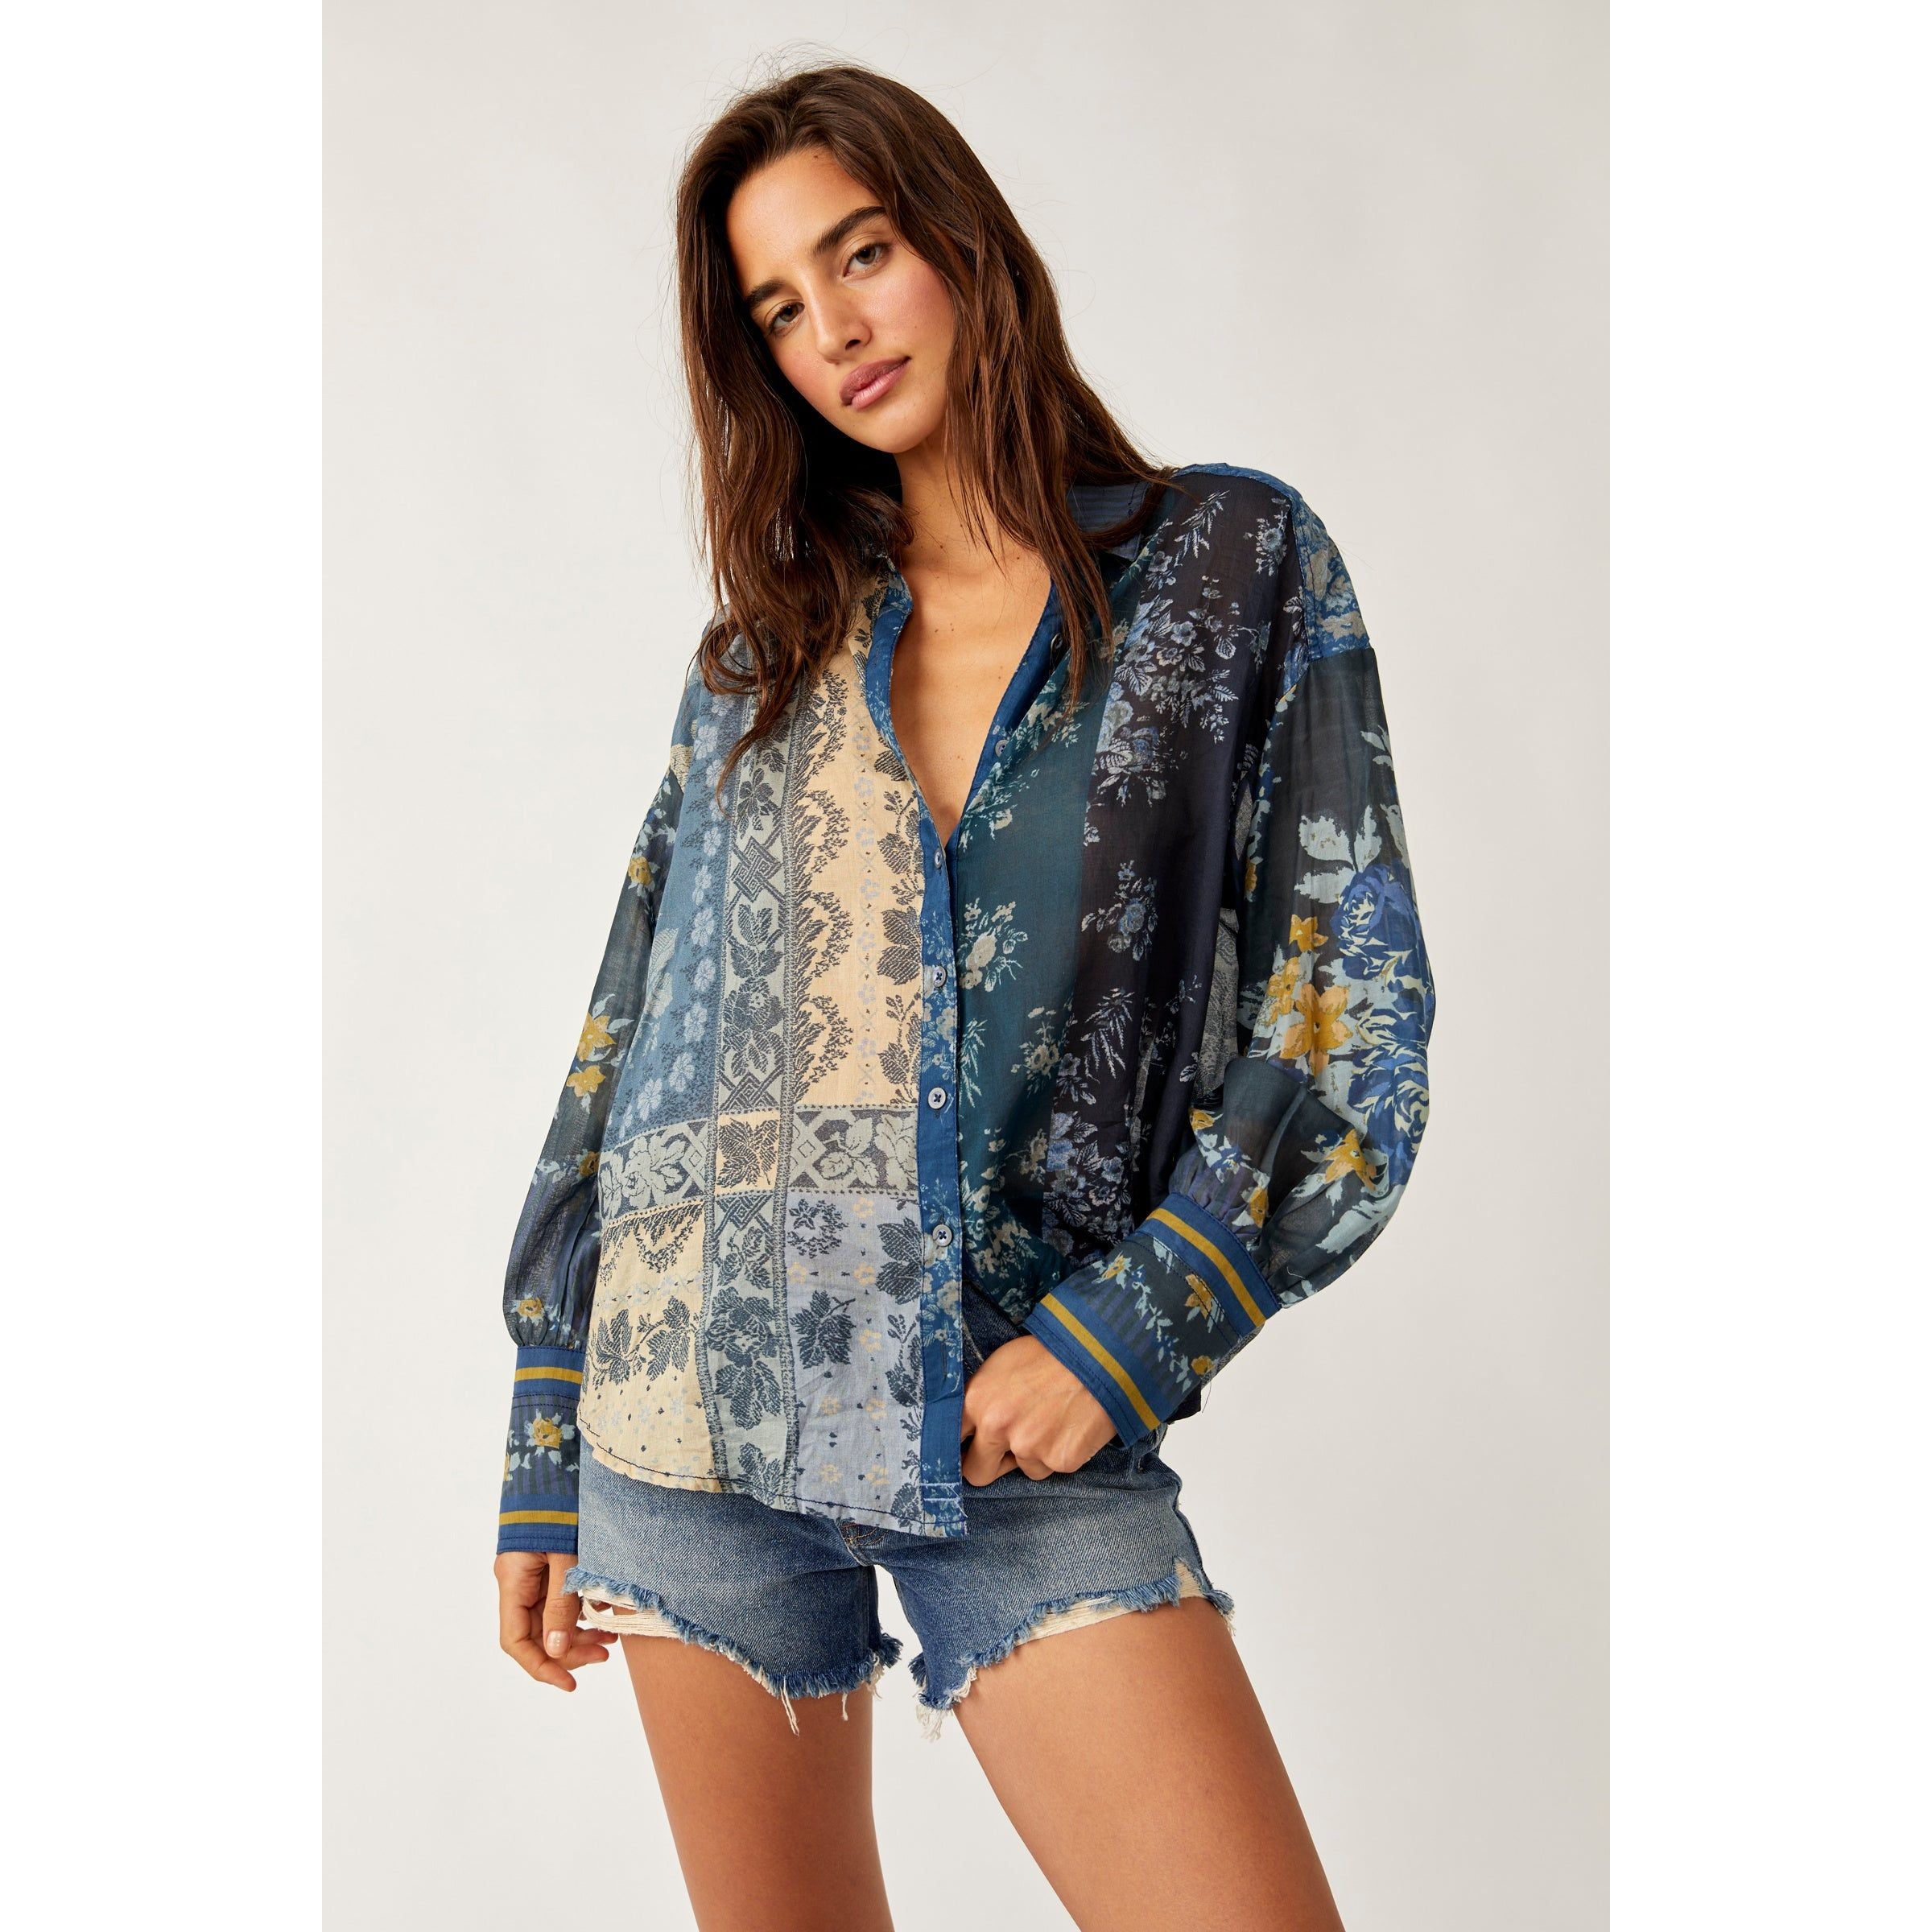 Free People - Flower Patch Top in Indigo Combo